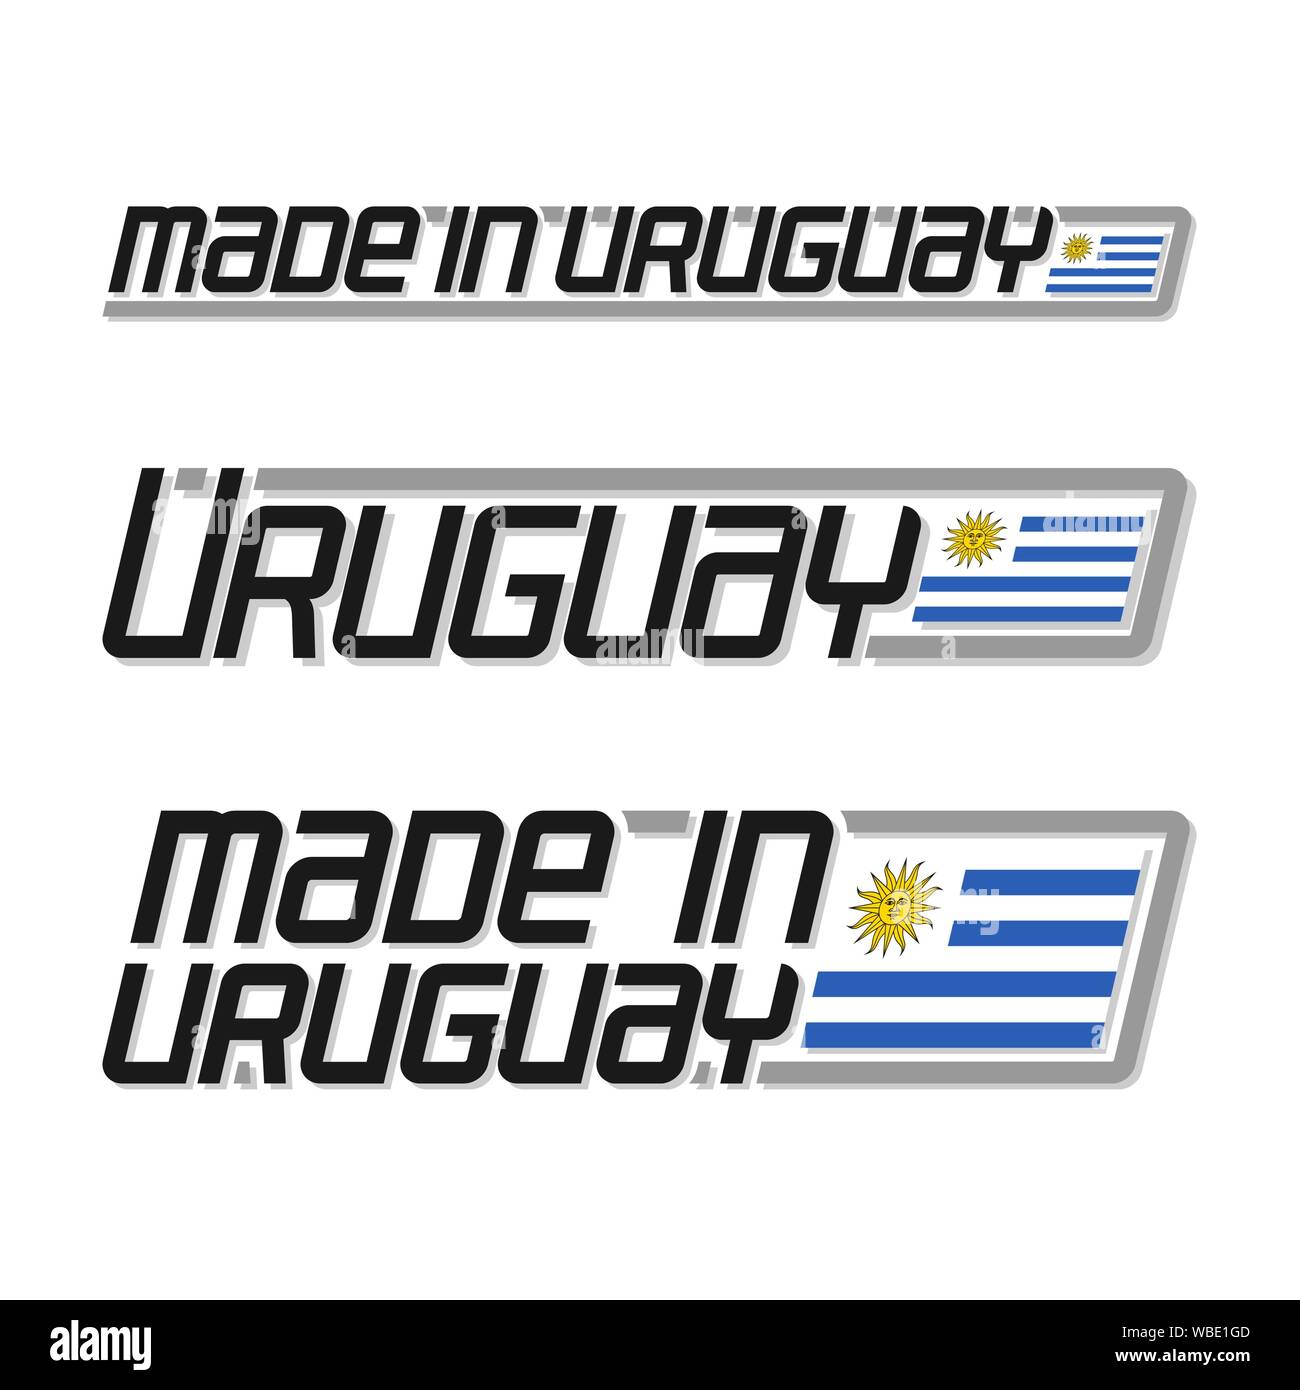 Vector illustration of logo 'made in Uruguay', set of Uruguayan national state flags and text uruguay on white background. Stock Vector